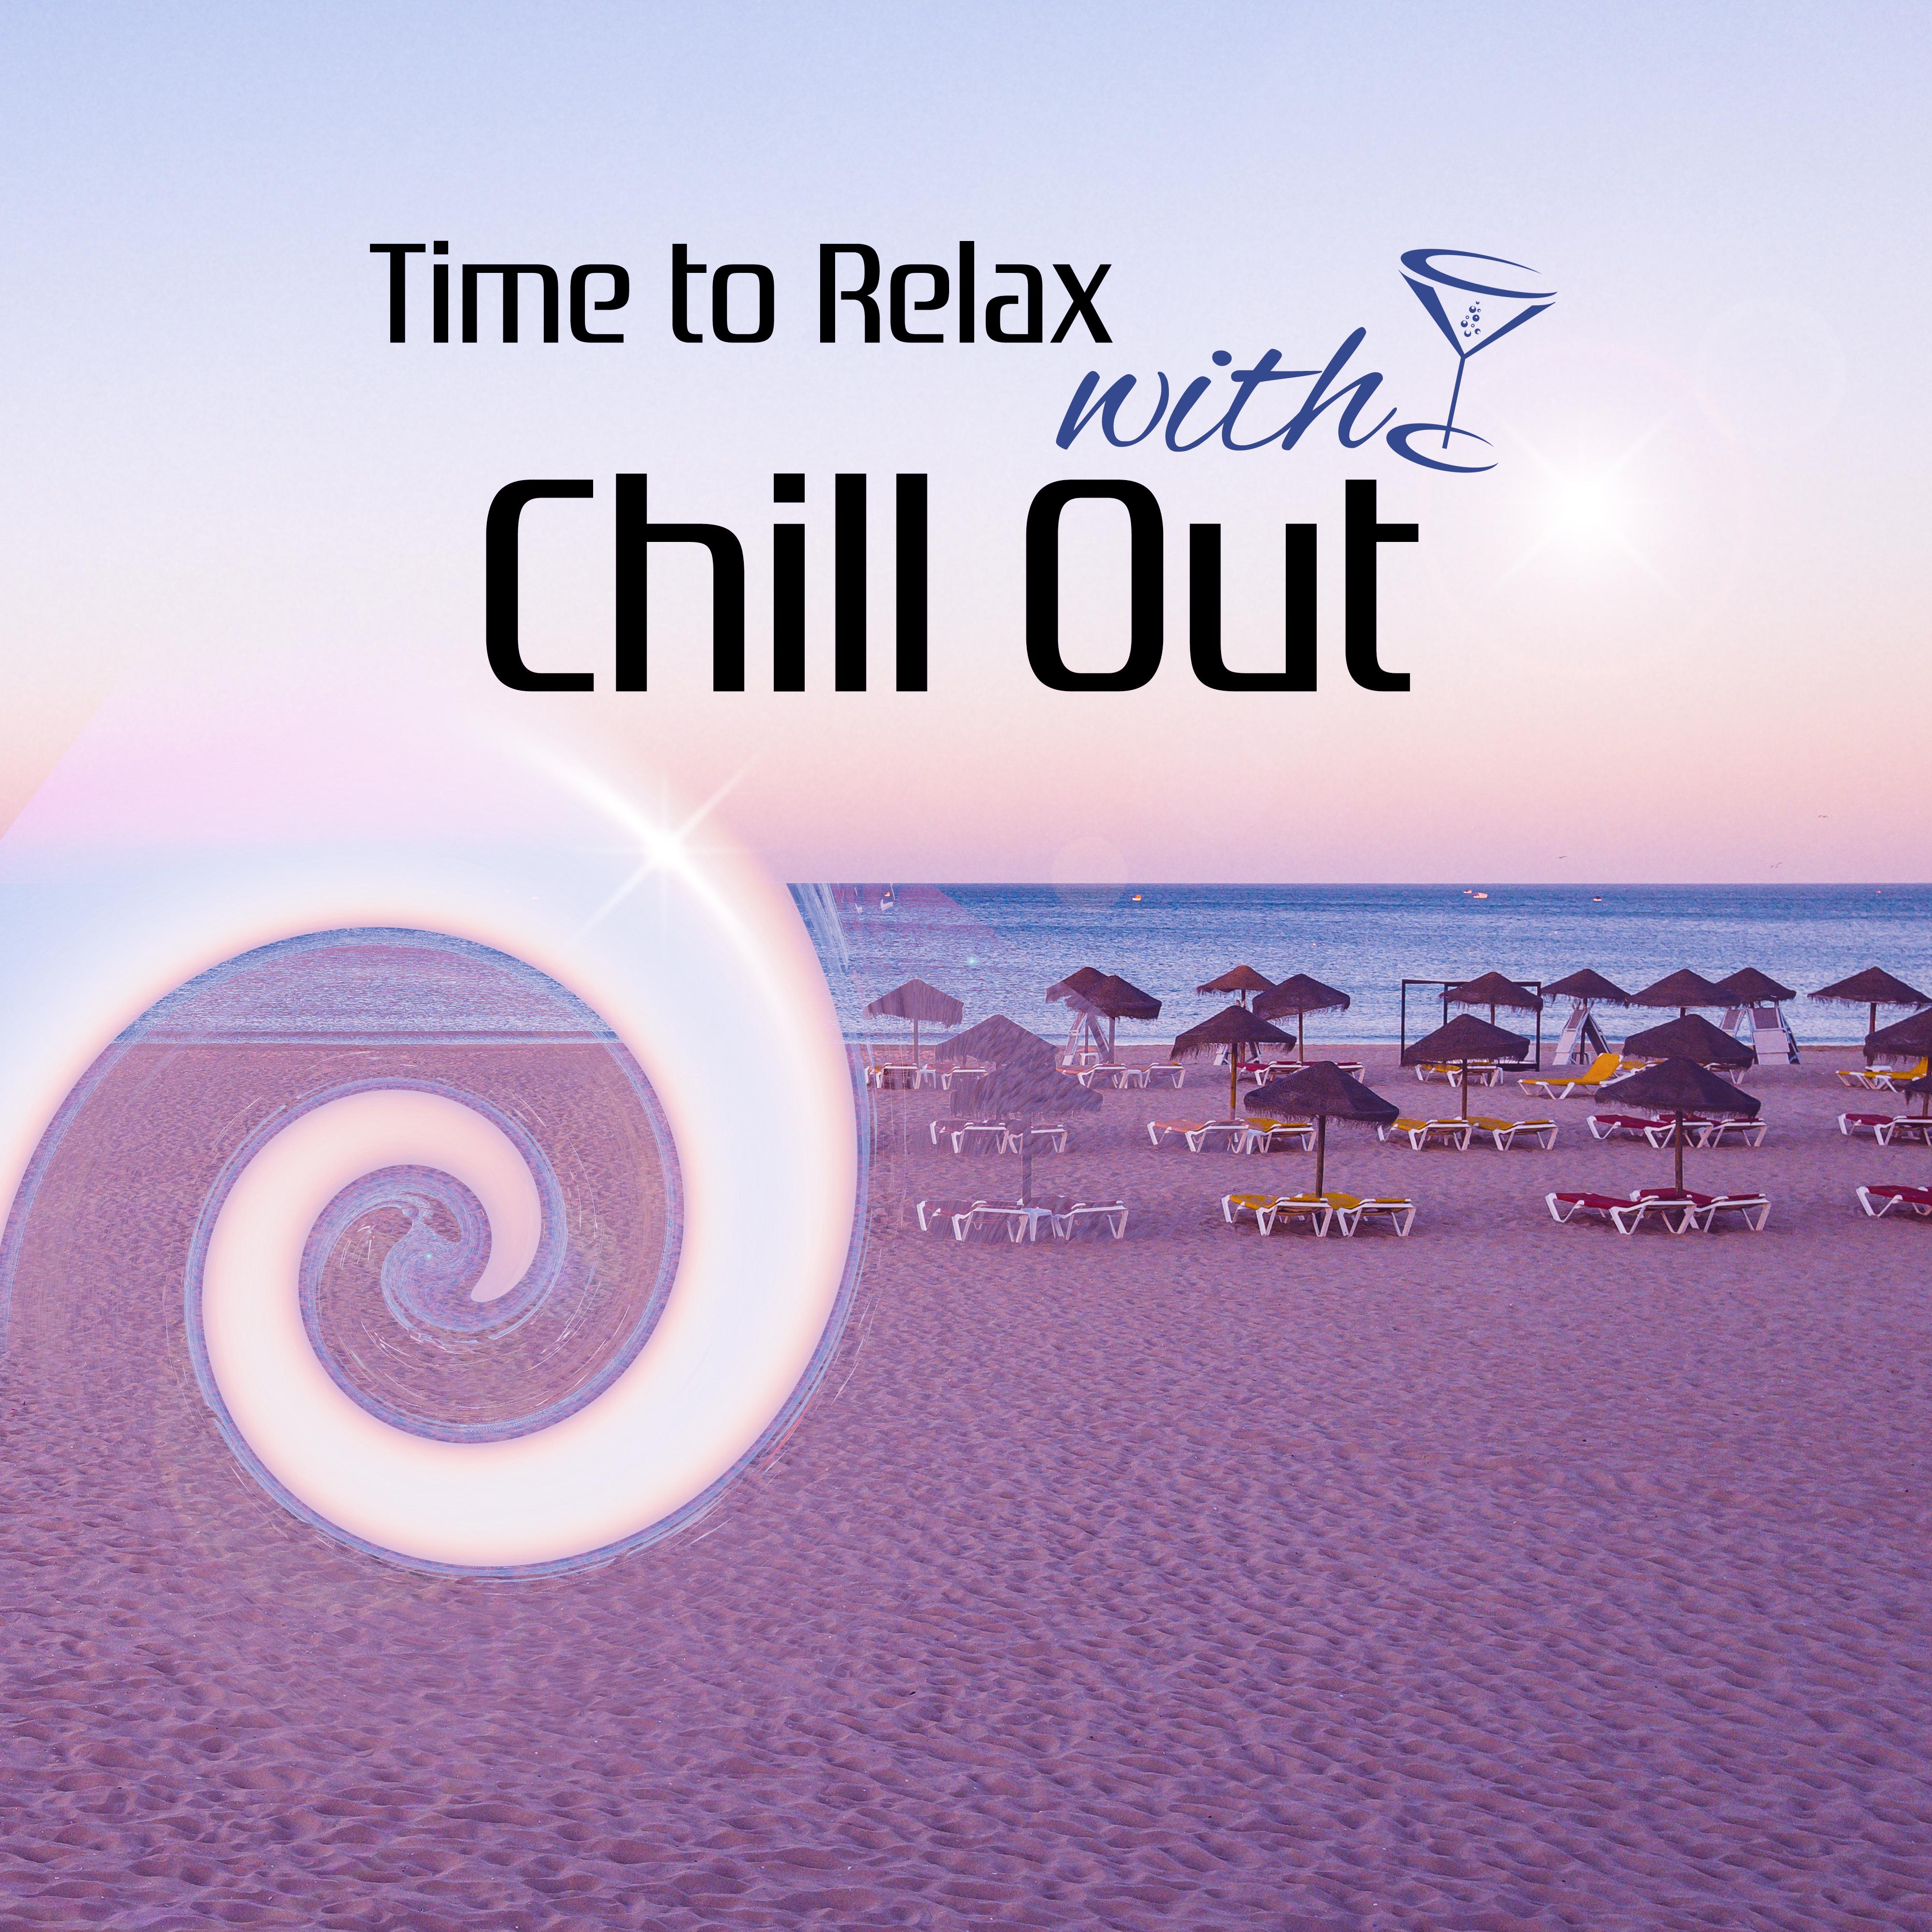 Time to Relax with Chill Out – Ibiza Relaxation, Beach House Lounge, Summertime Music, Holiday Sounds